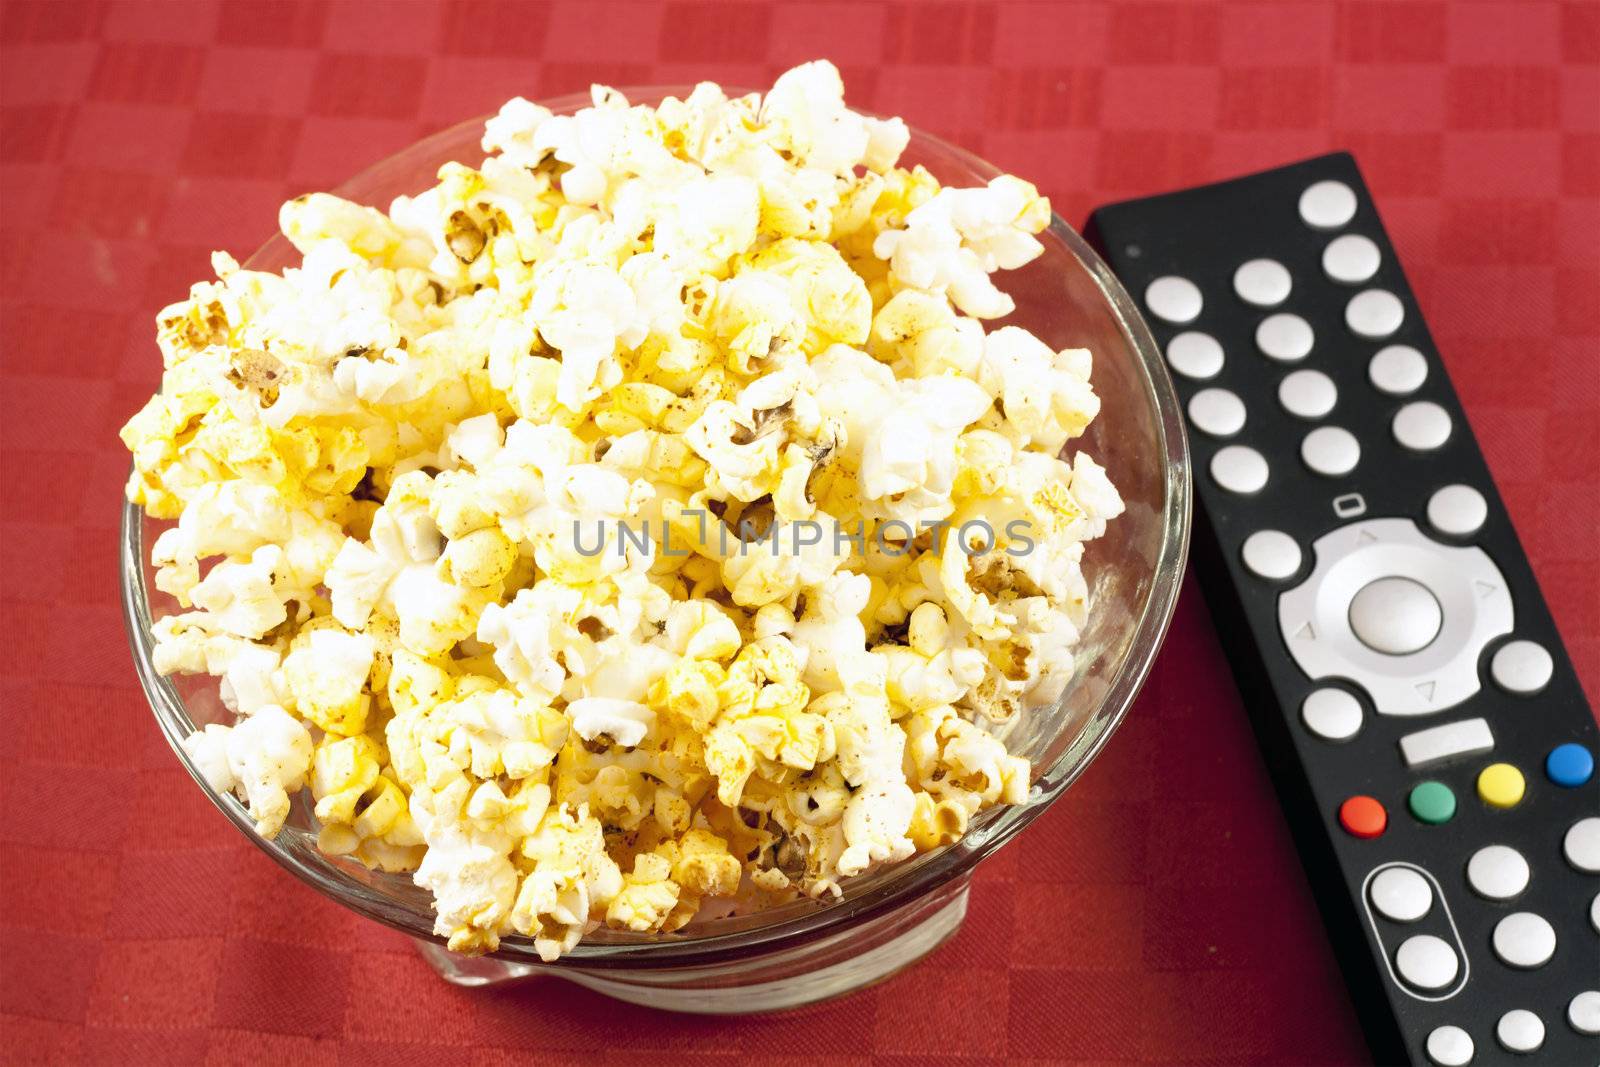 Bowl of popcorn on the table and remote control for TV